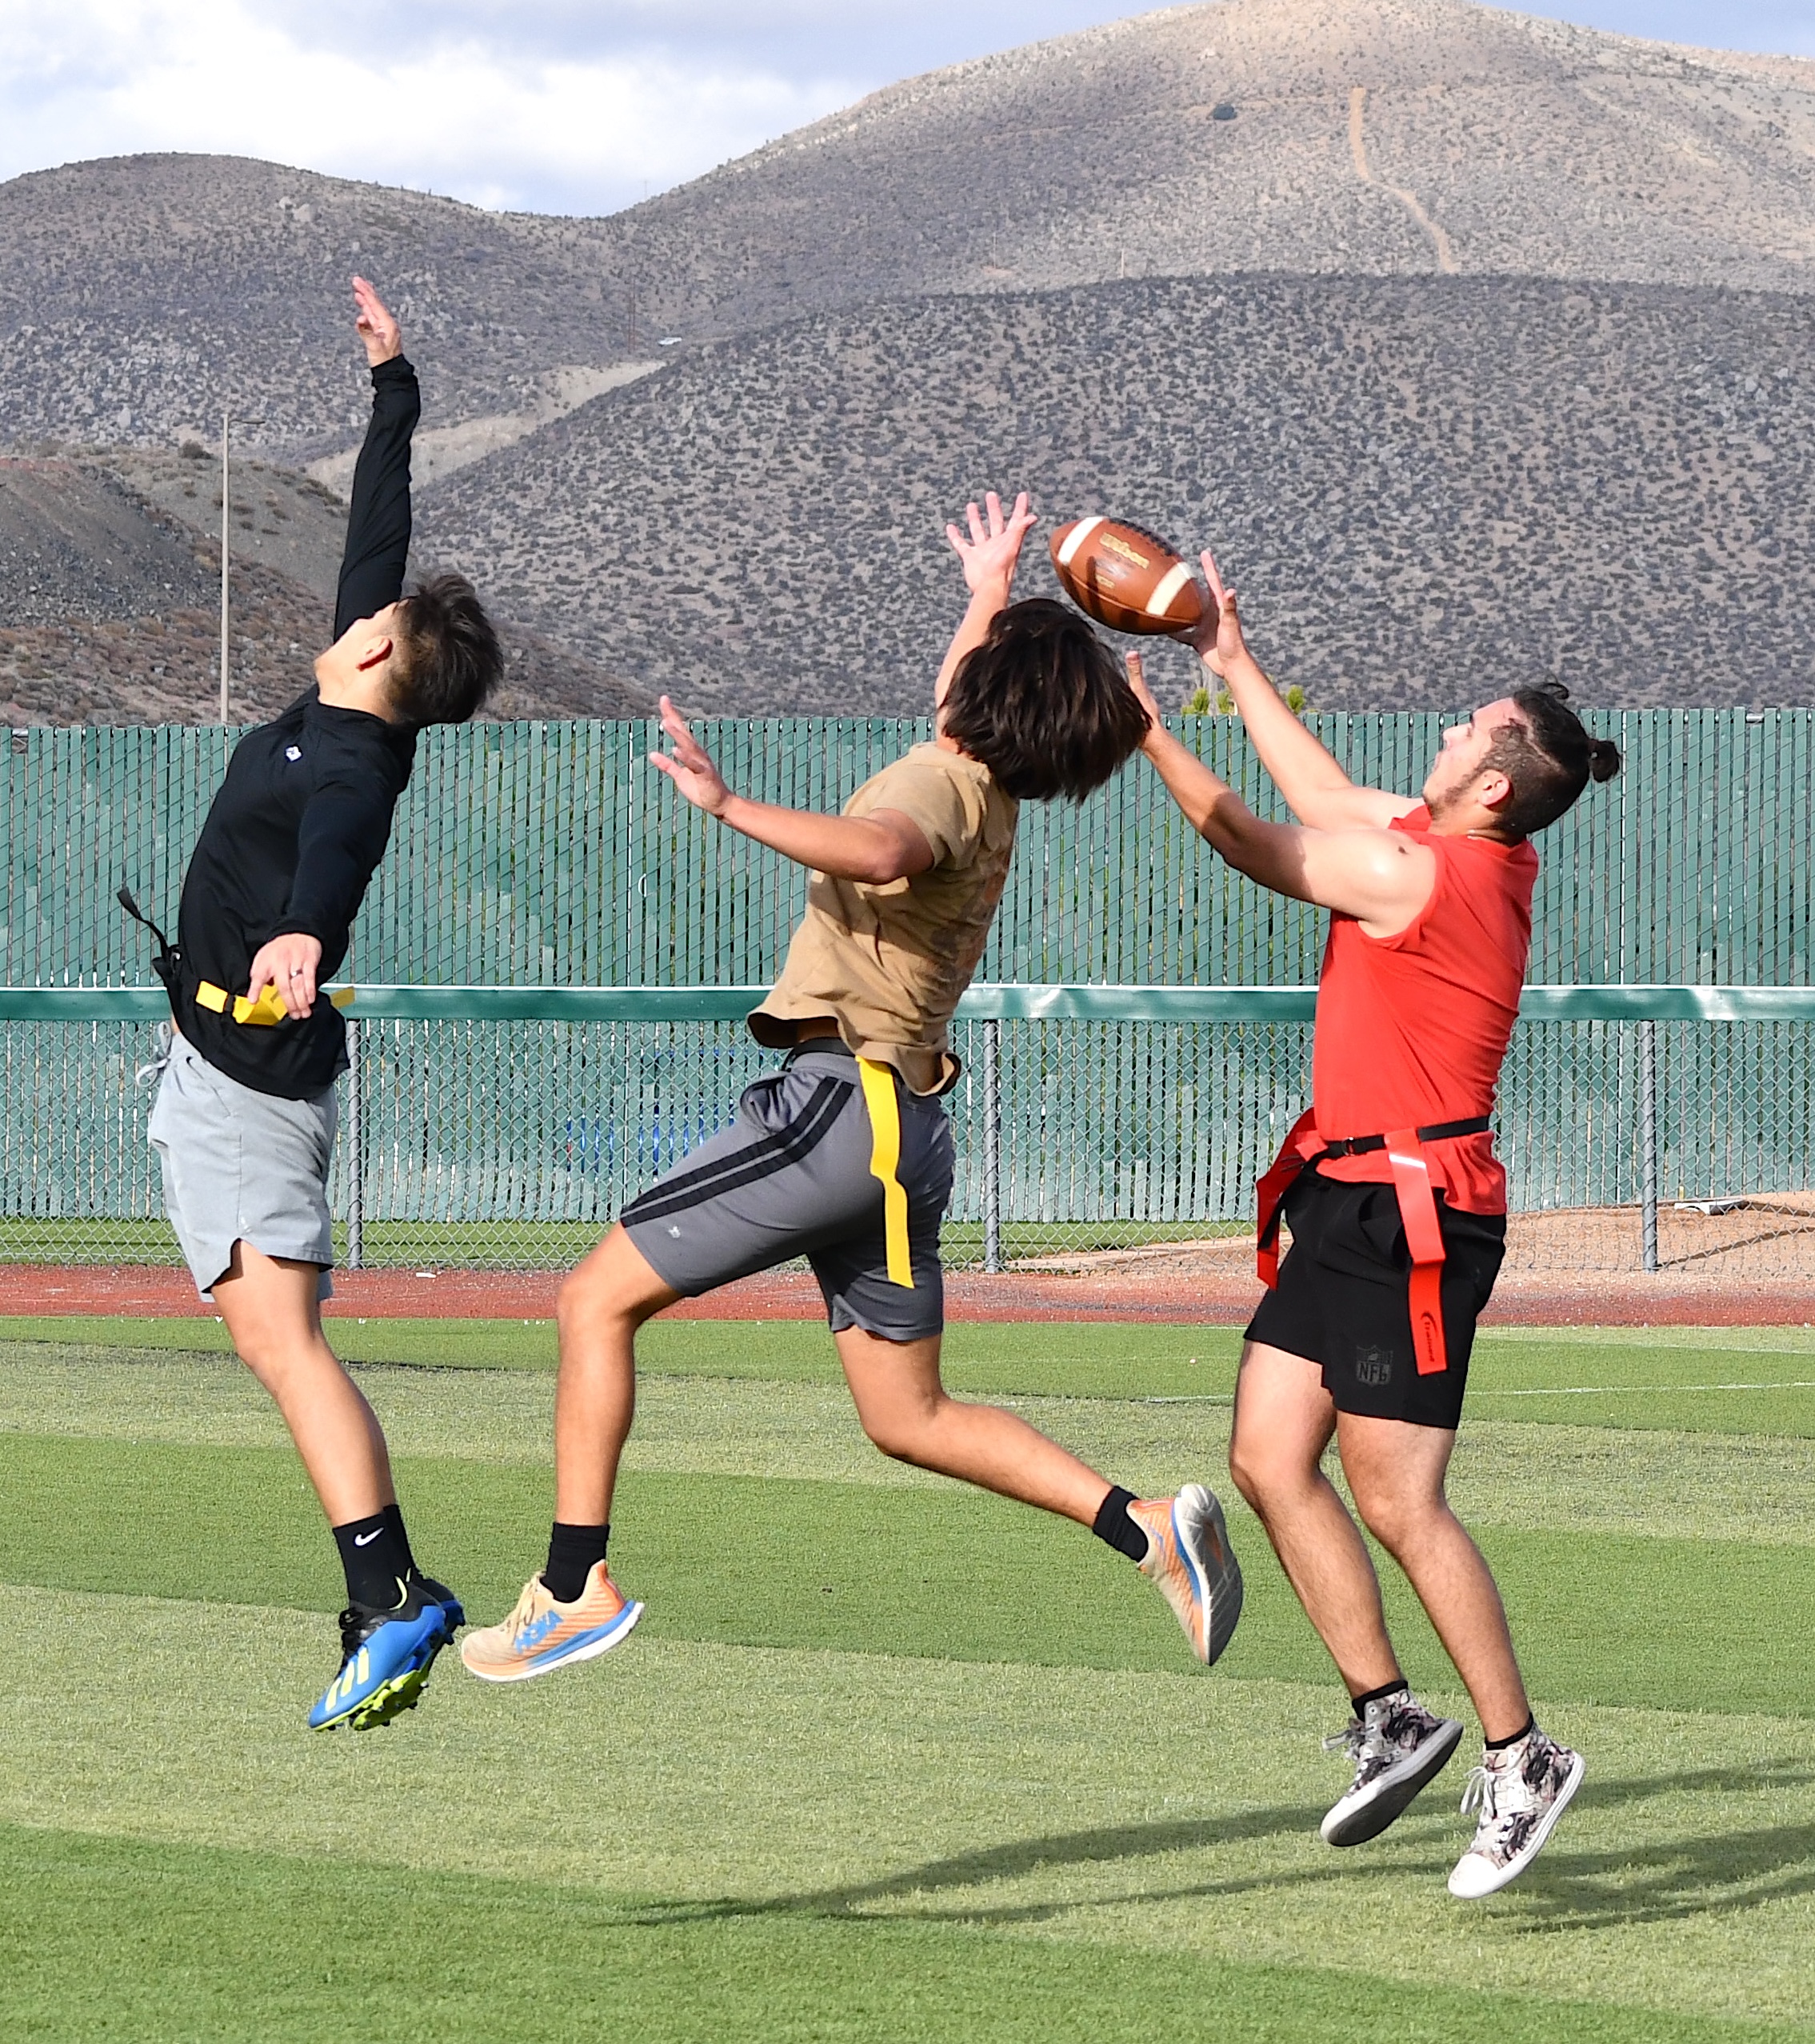 Turkey Bowl II featured a variety of big plays as Advising repeated as champions at John L. Harvey Field.